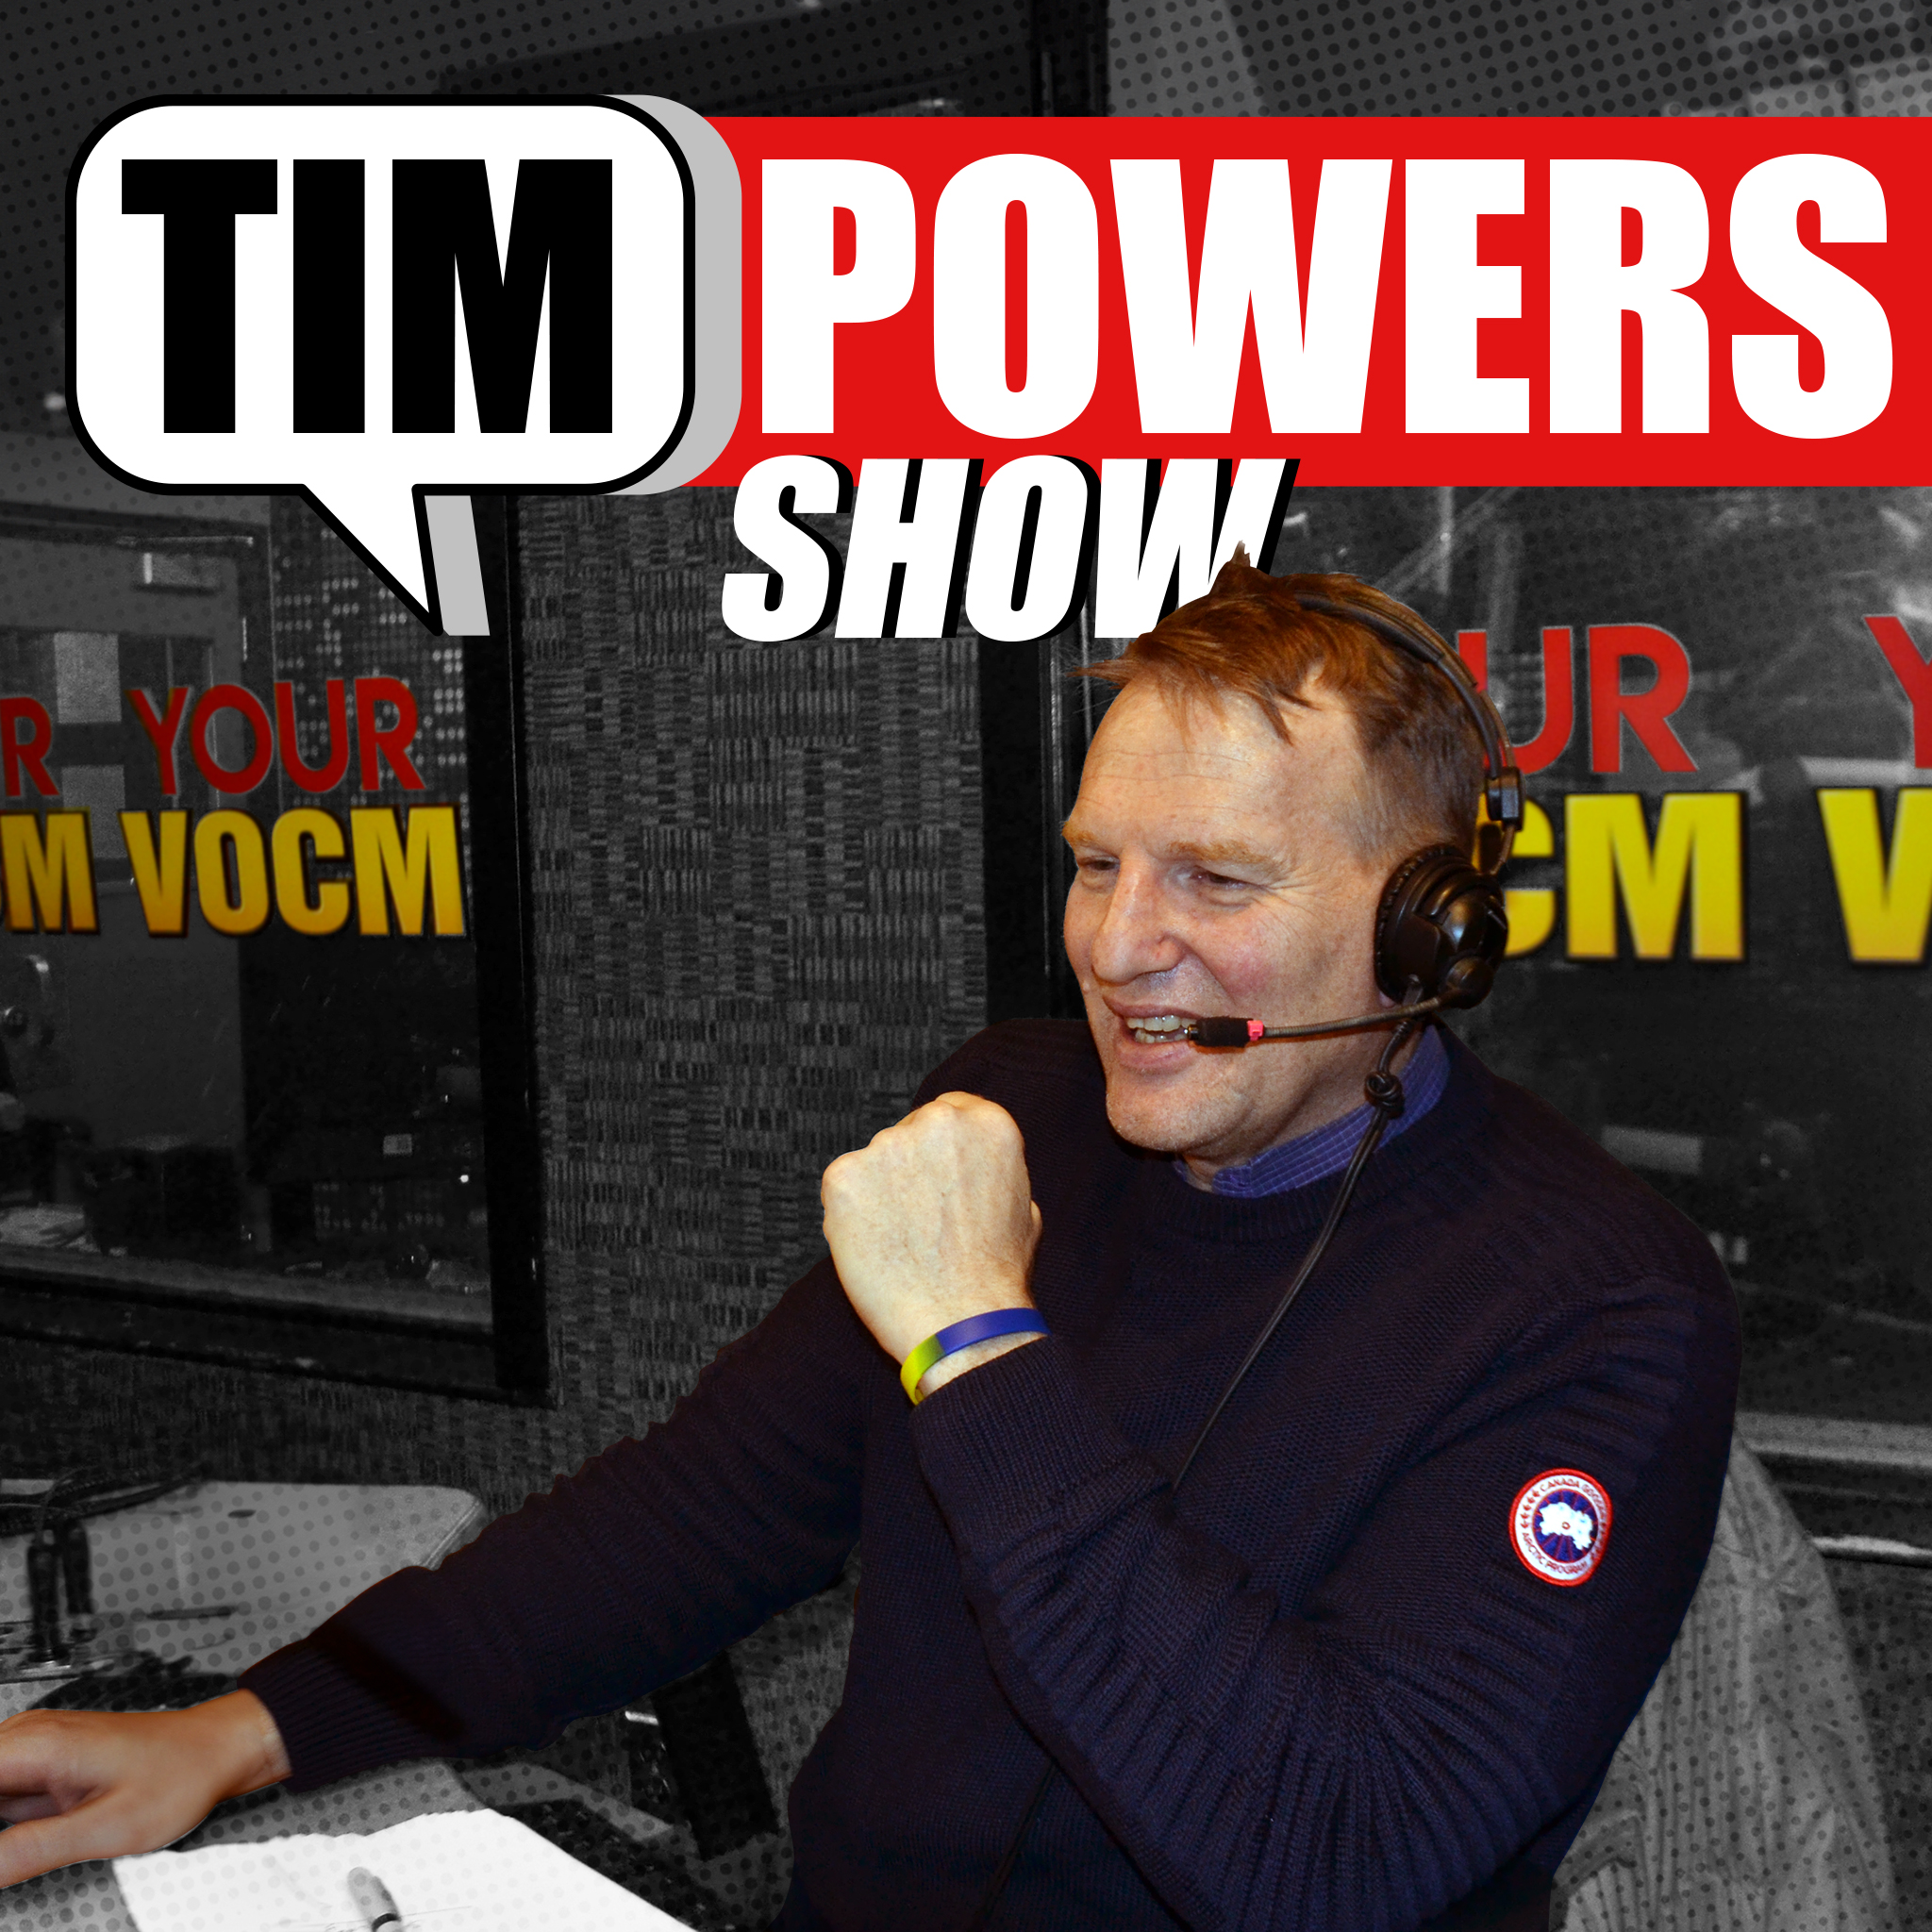 The Tim Powers Show, Thursday May 2nd